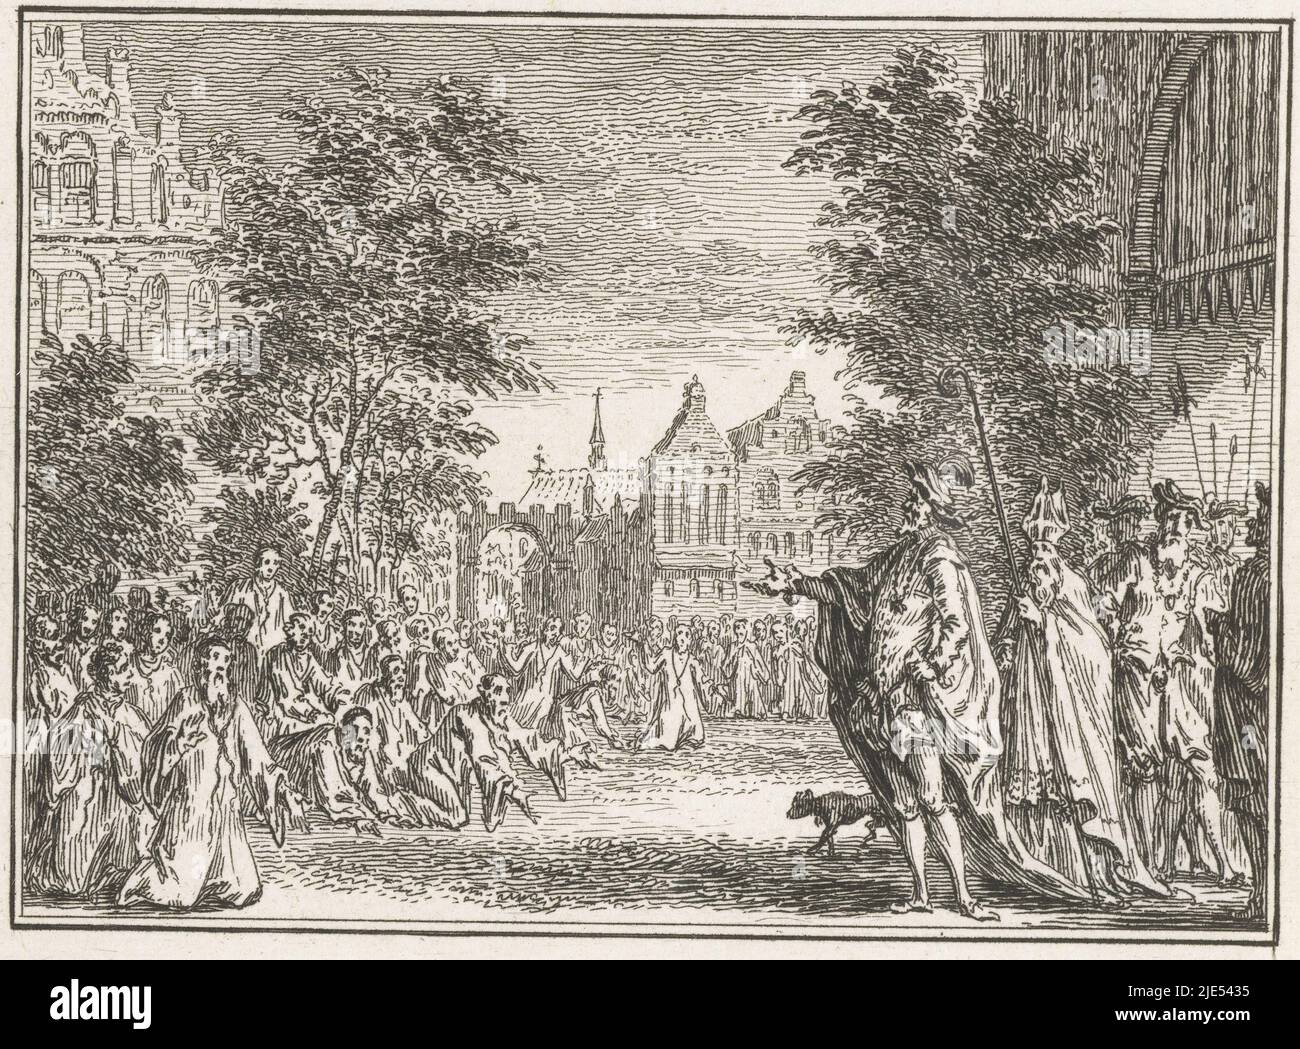 Charles V punishes the inhabitants of Ghent for the city's refusal to pay the agreed tax. Public humiliation on 3 May 1540 in which 500 inhabitants of Ghent kneel before the emperor barefoot and with a noose around their neck, begging for mercy, Karel V punishes the inhabitants of Ghent, 1540., print maker: Simon Fokke, Northern Netherlands, 1782 - 1784, paper, etching, h 93 mm × w 110 mm Stock Photo